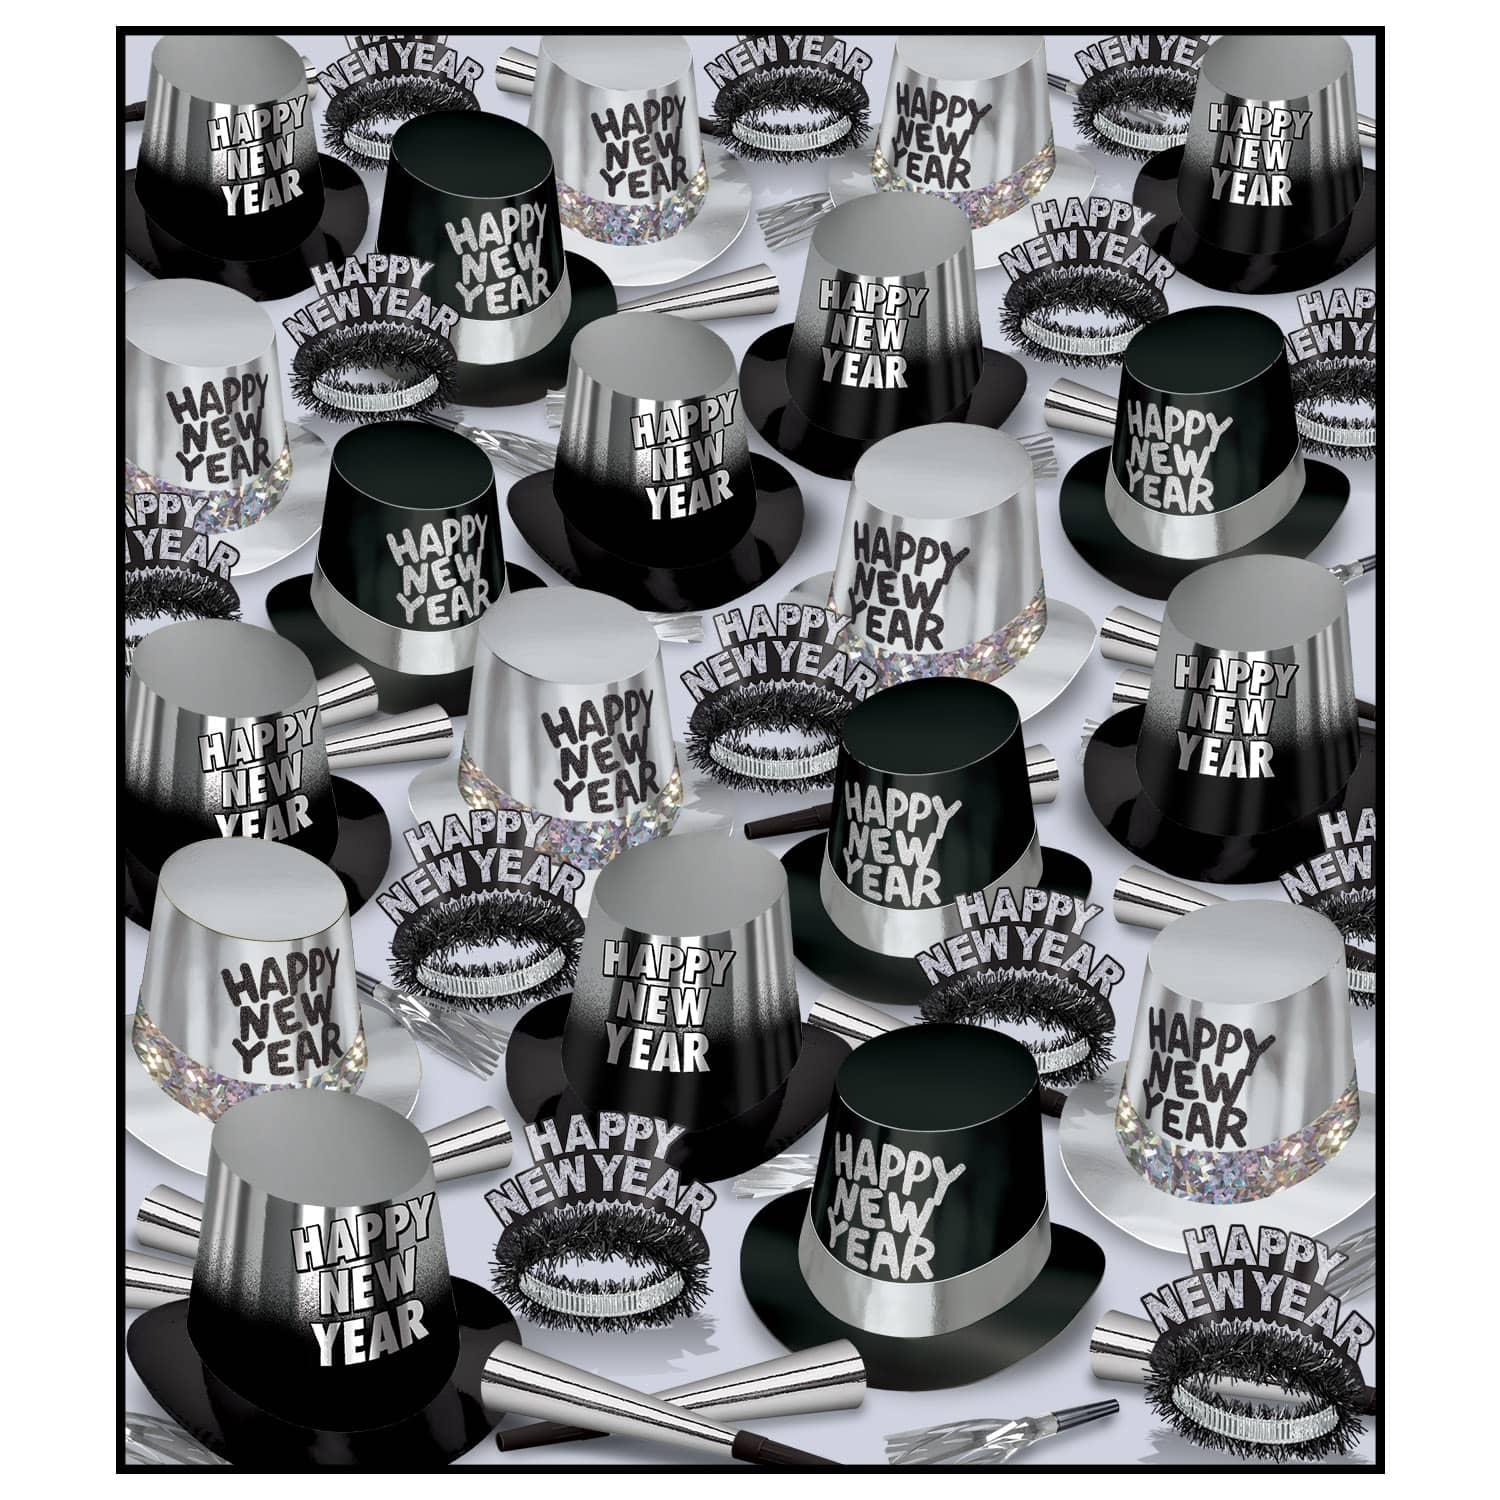 The Great New Year Assortment for 300 - Silver/Black New Years, New Years Eve, party supplies, party kits, assortment, colorful, multi-colored, party hats, party horns, tiaras, for 300